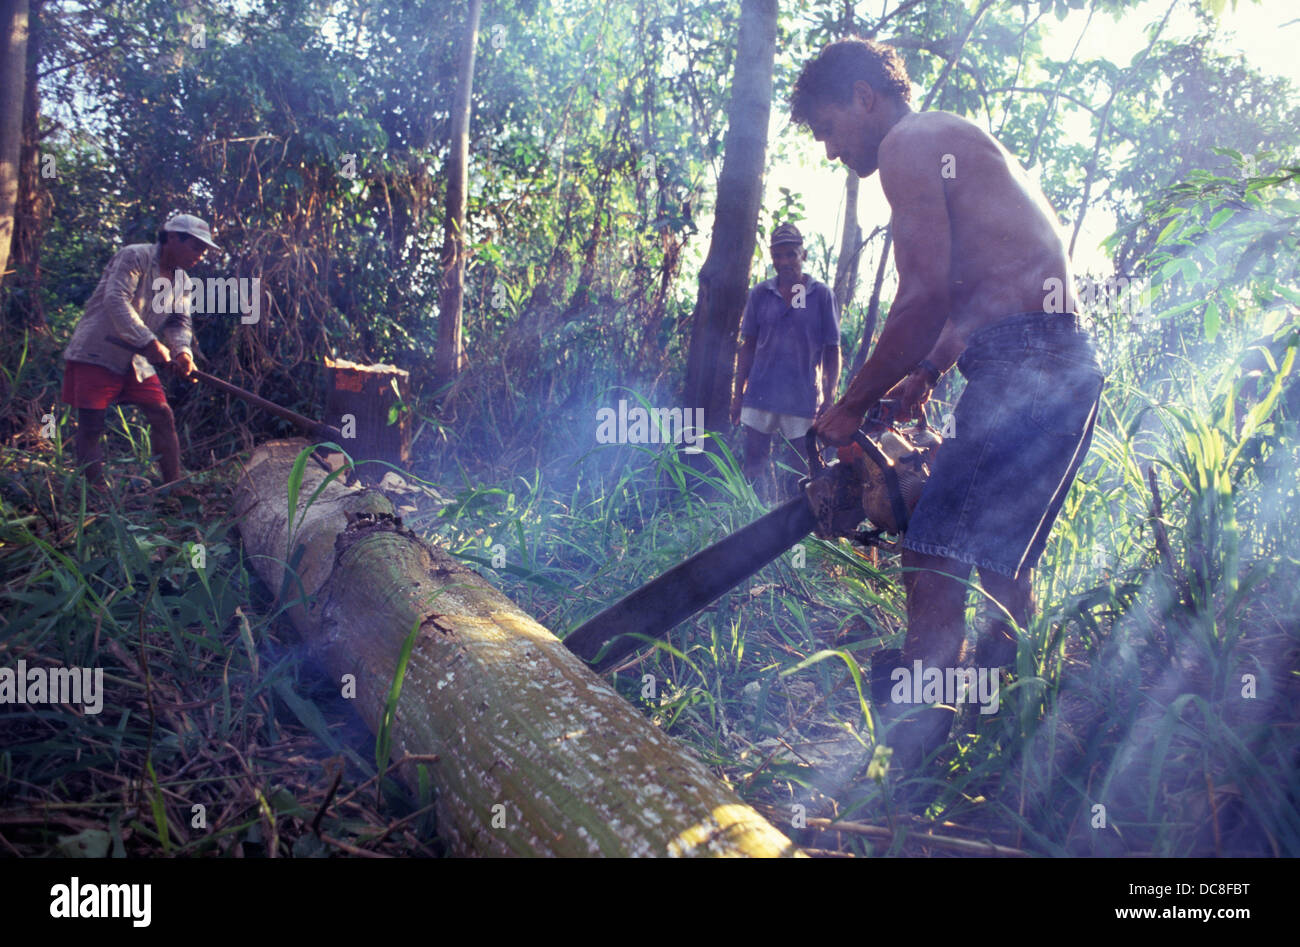 Illegal logging, cutting of tree with chainsaw, Amazon rain forest deforestation. Stock Photo